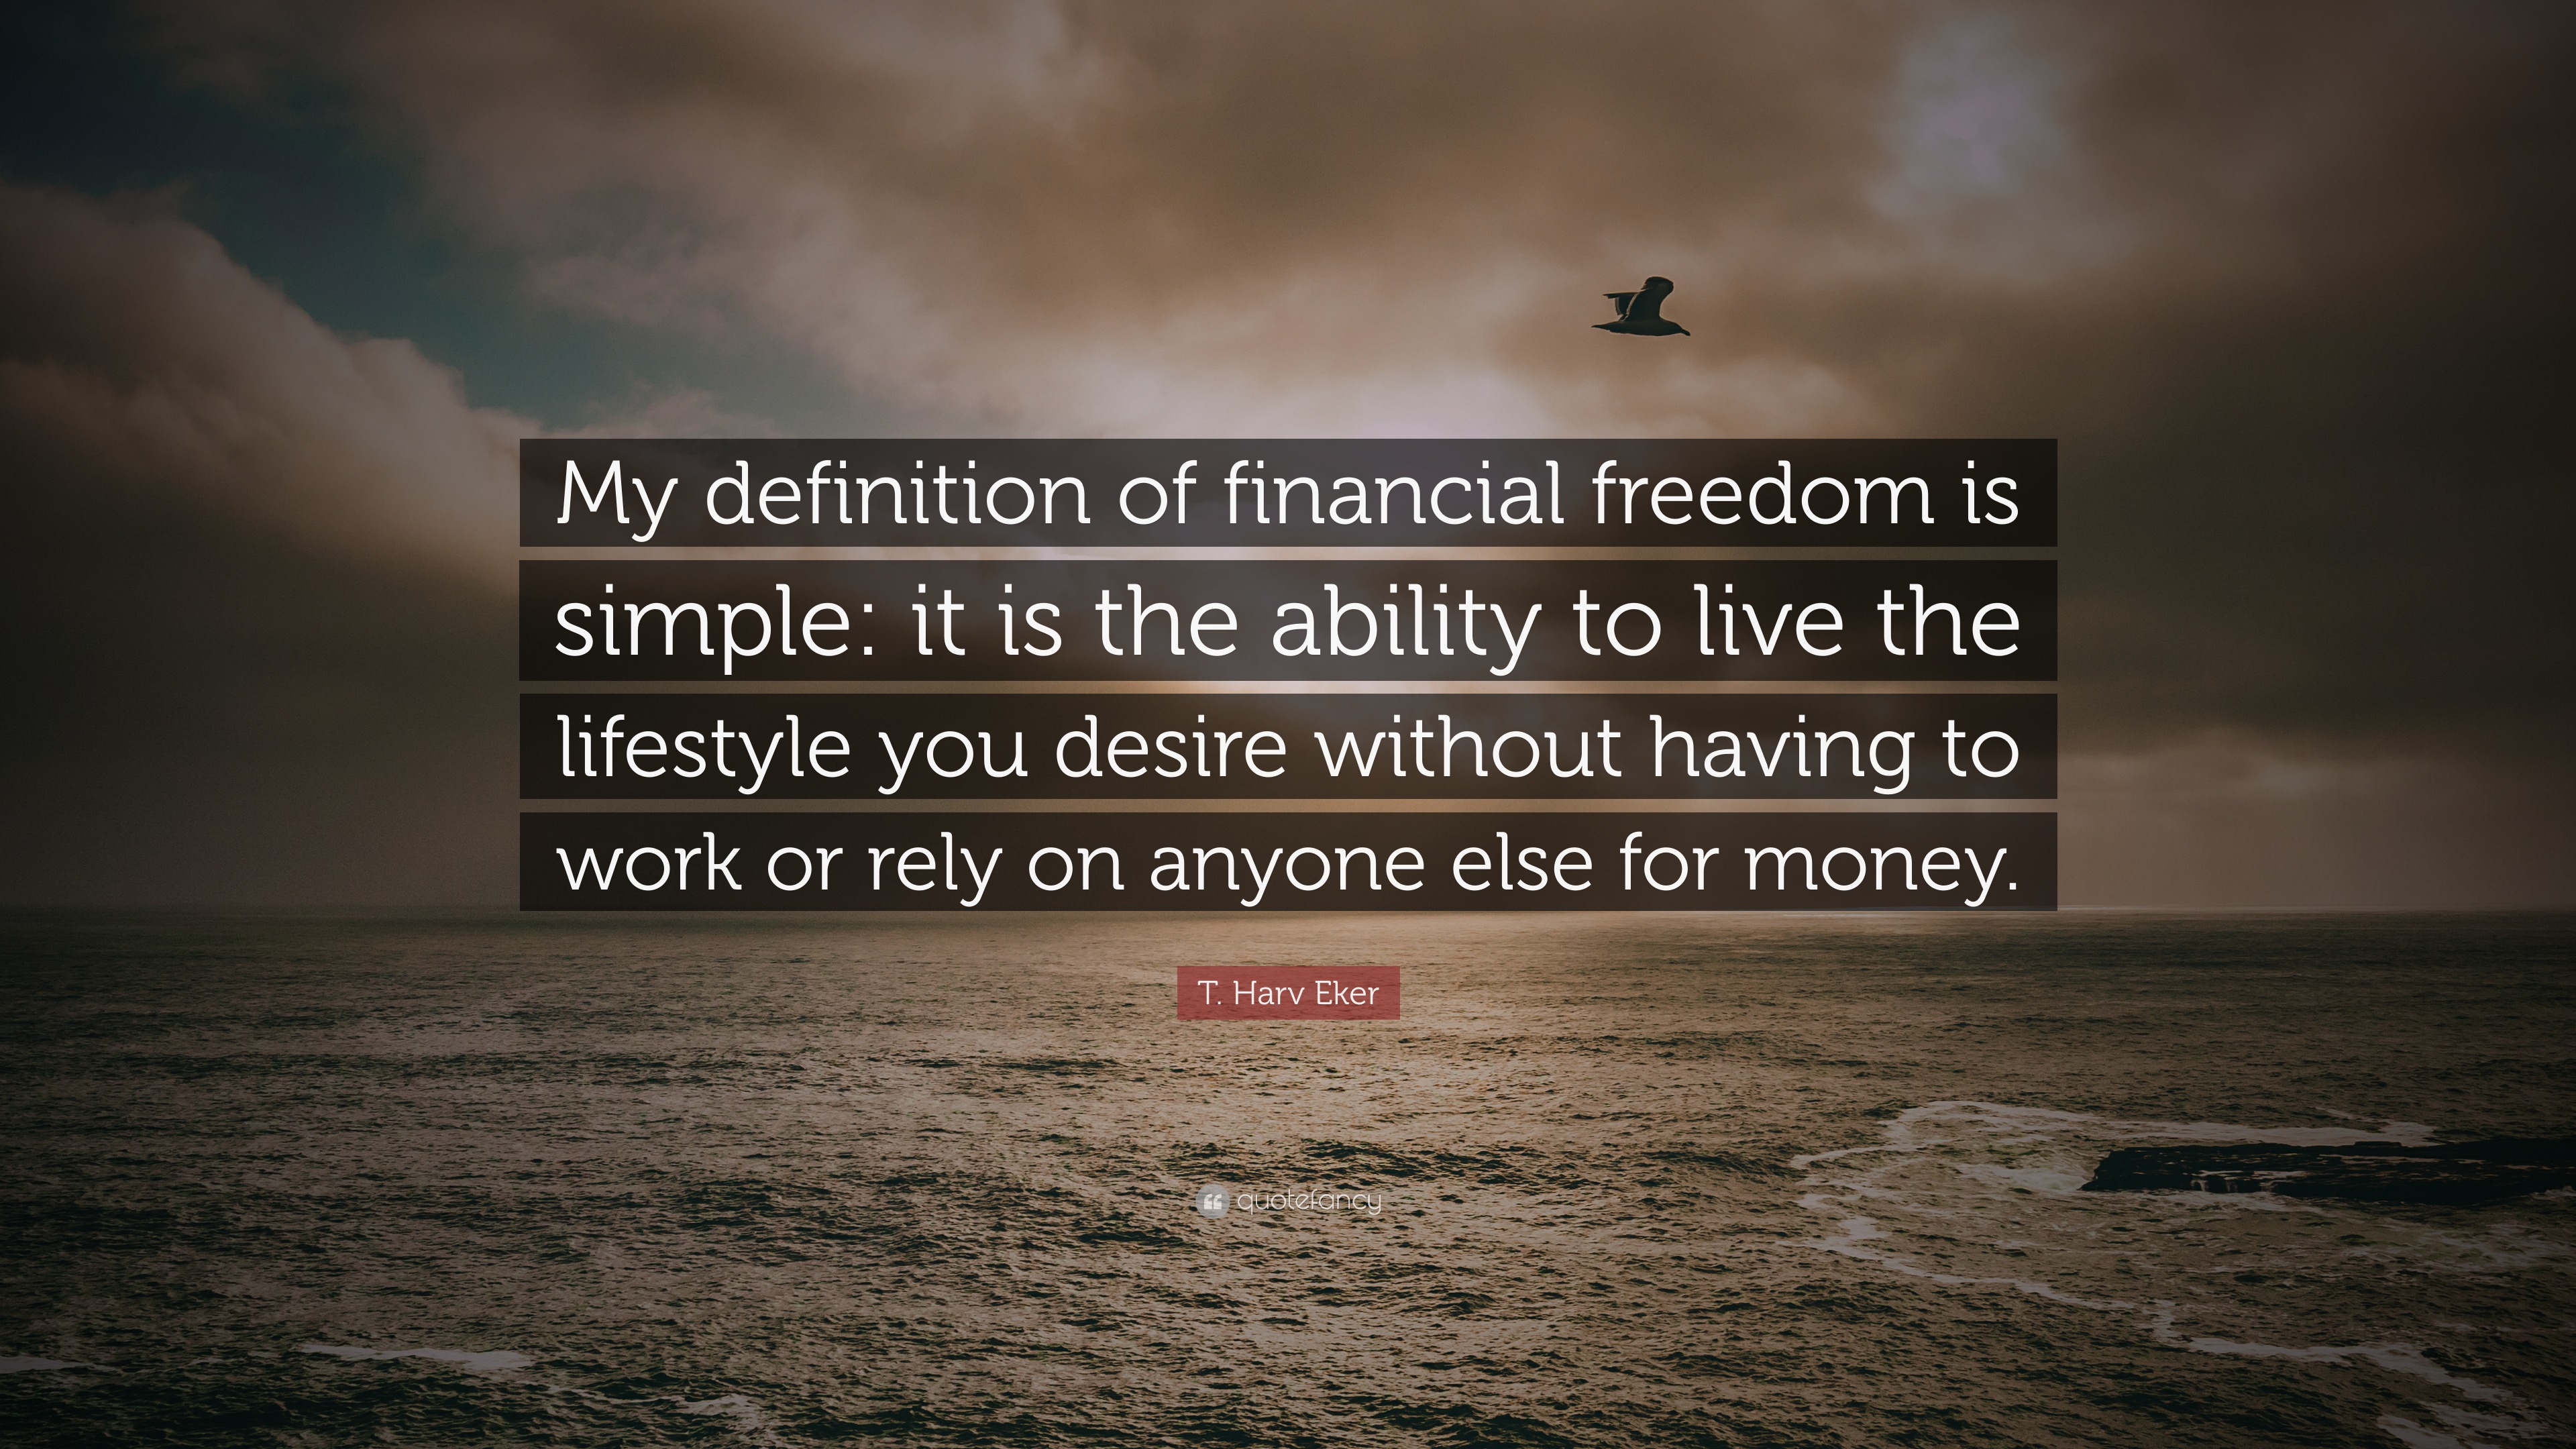 T. Harv Eker Quote: “My definition of financial freedom is simple: it